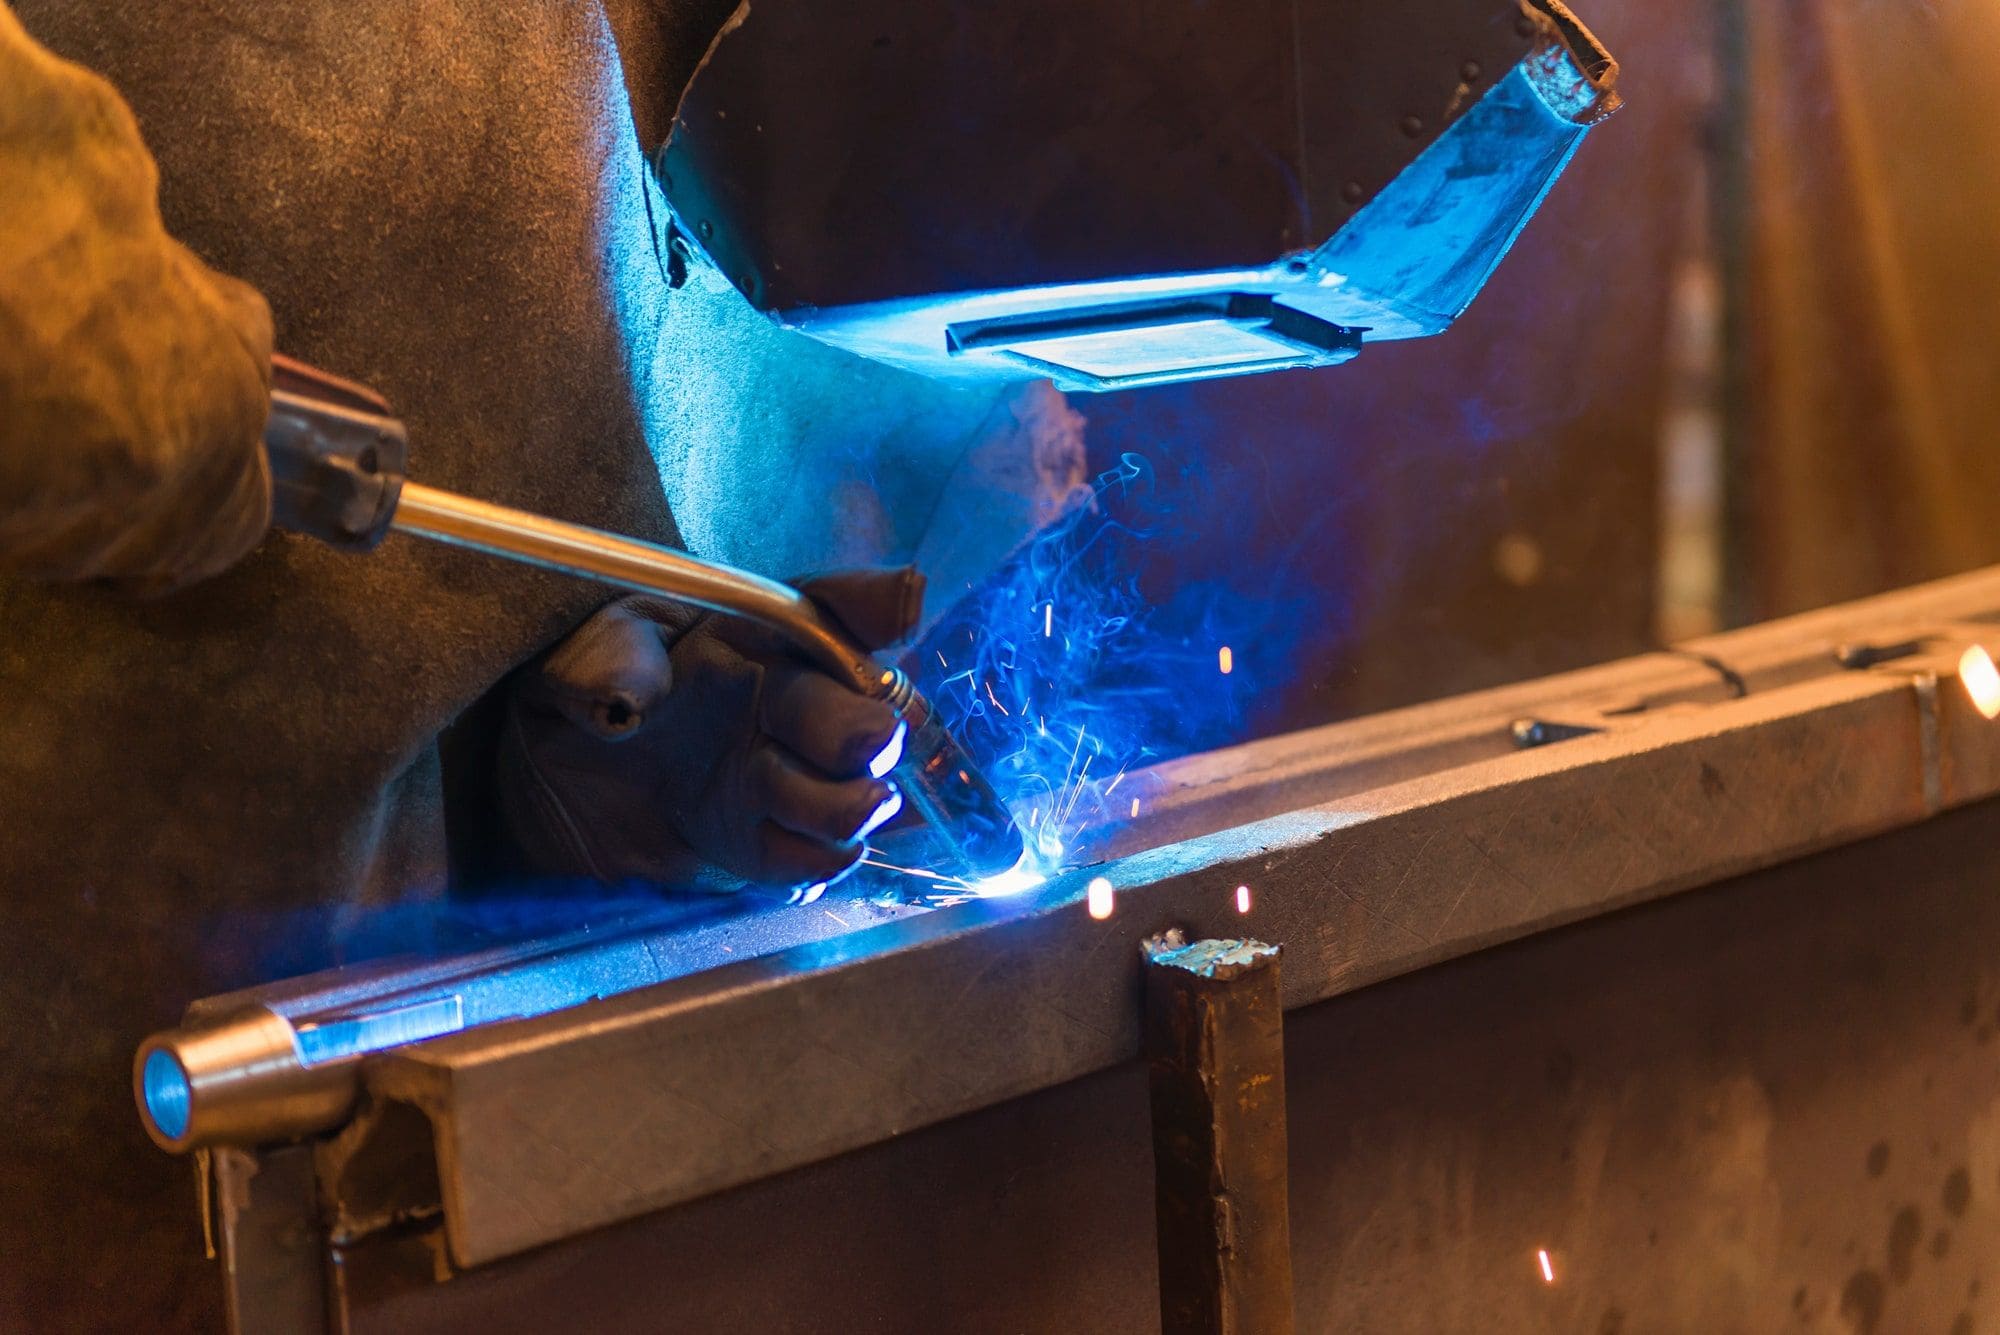 Ways to weld metal without using electricity